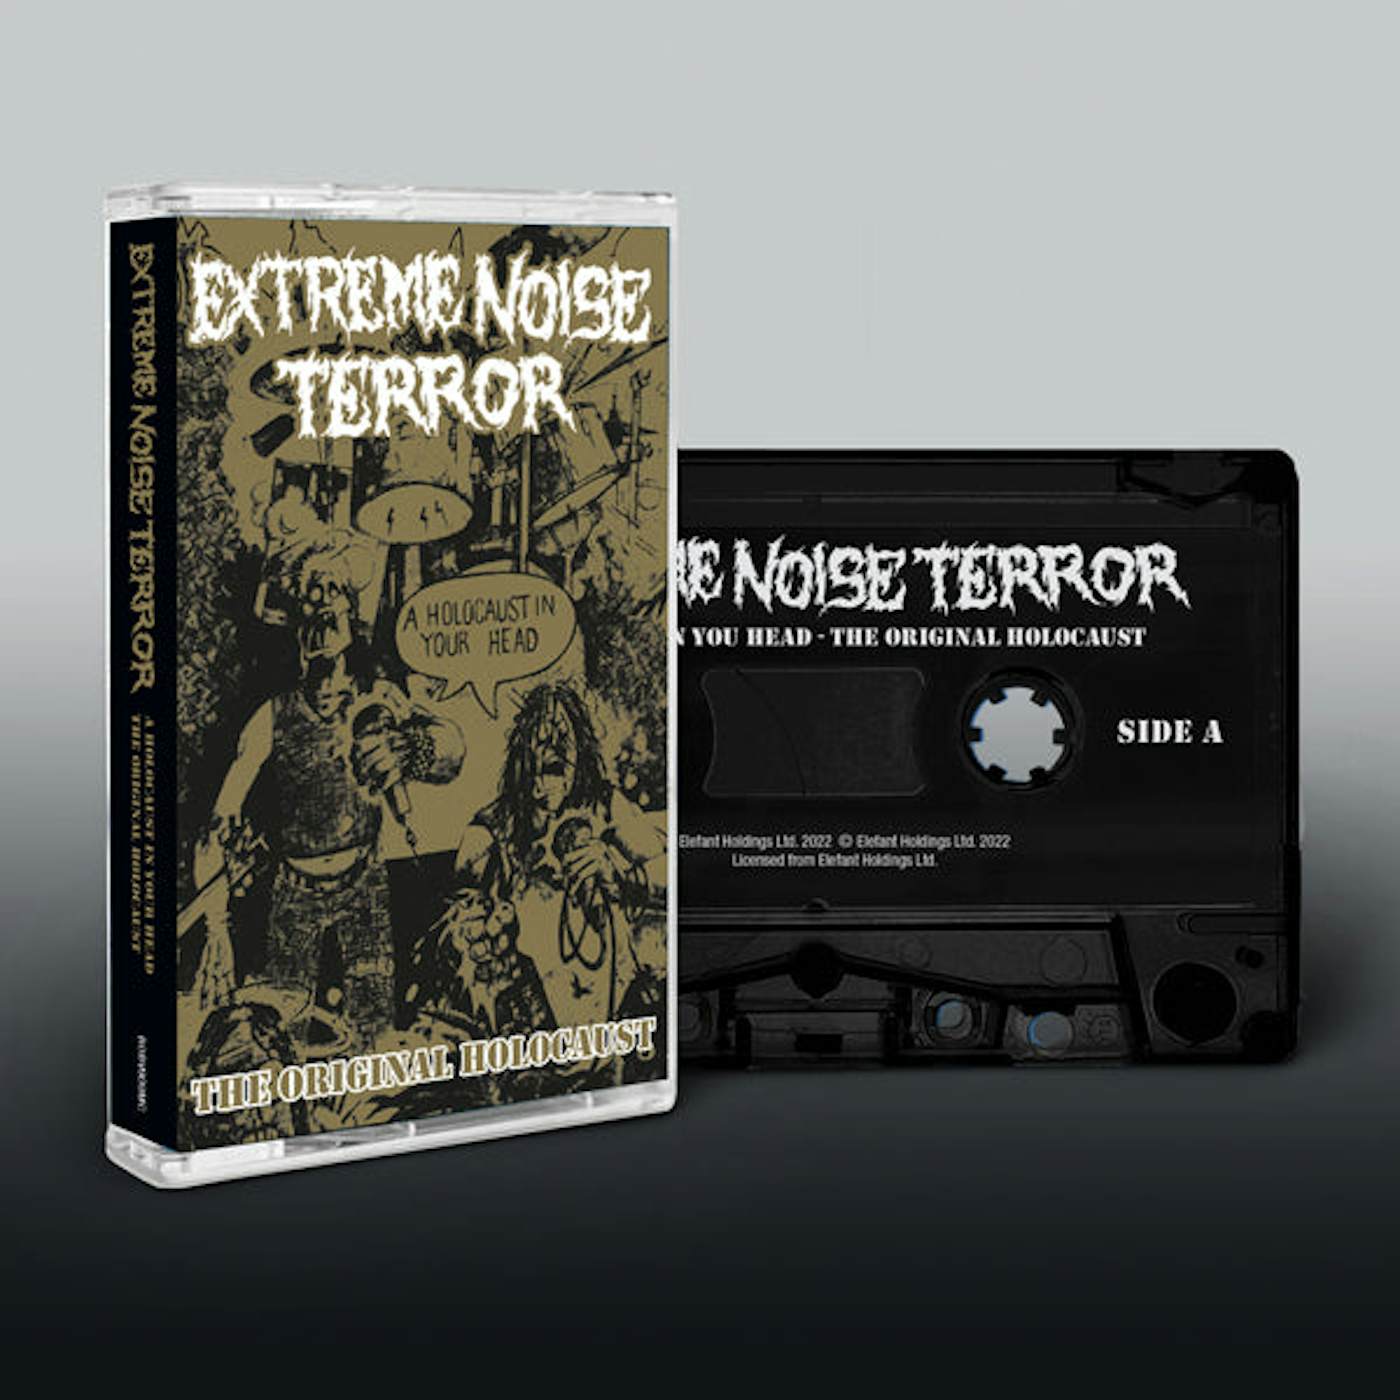 Extreme Noise Terror Music Cassette - Holocaust In Your Head - The Original Holocaust